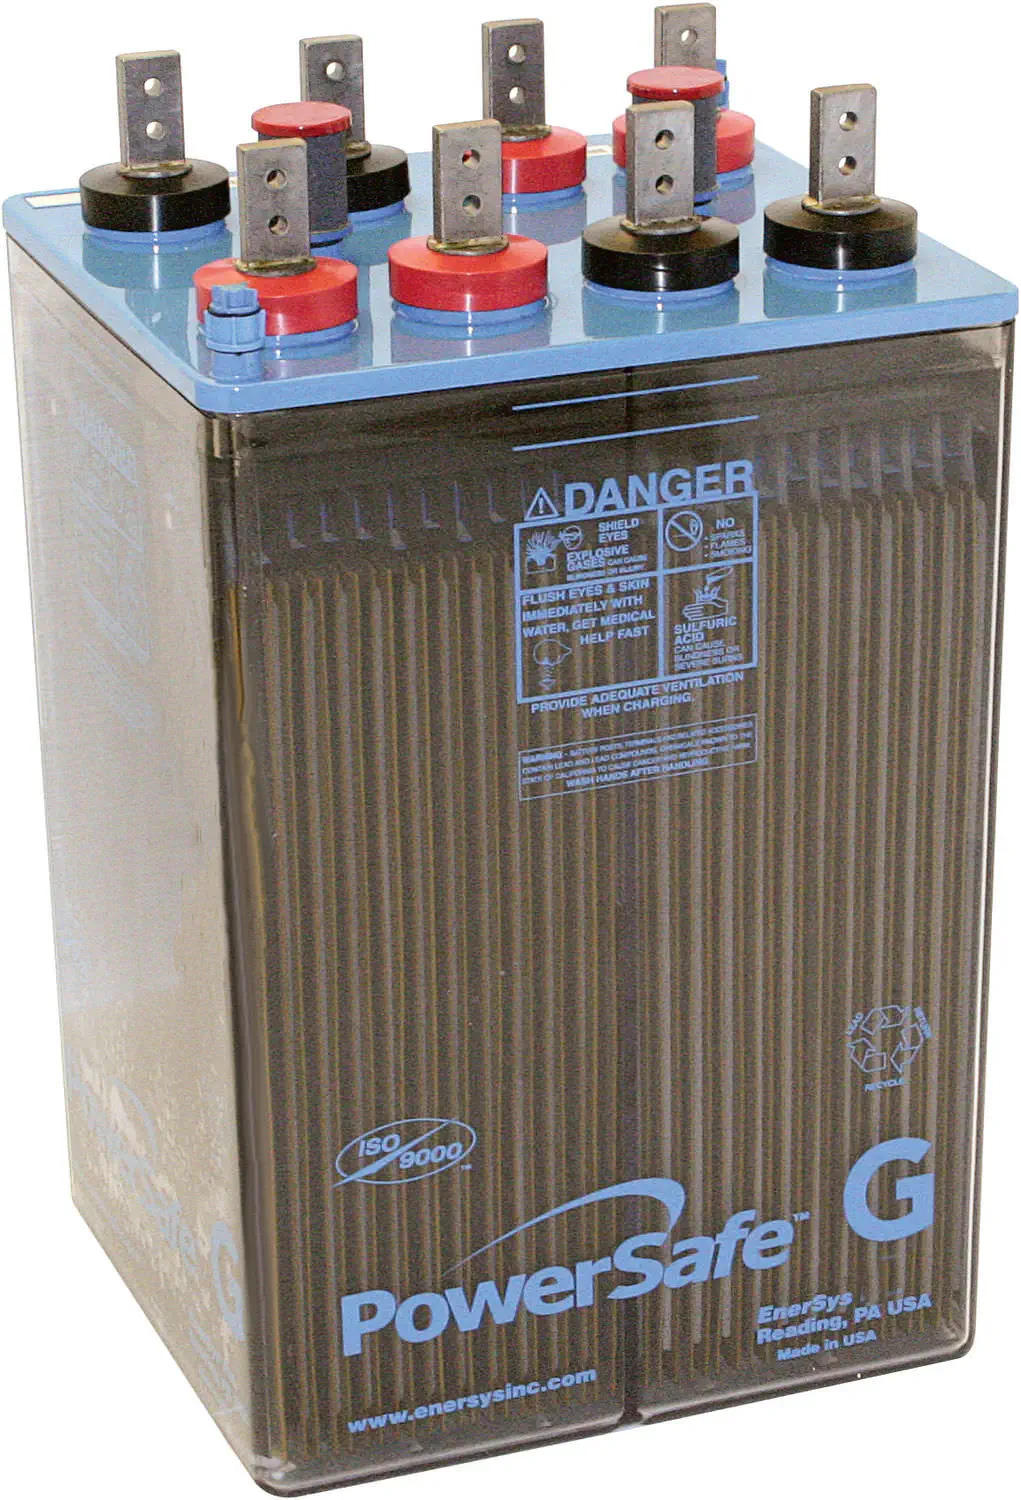 EnerSys PowerSafe GN-41